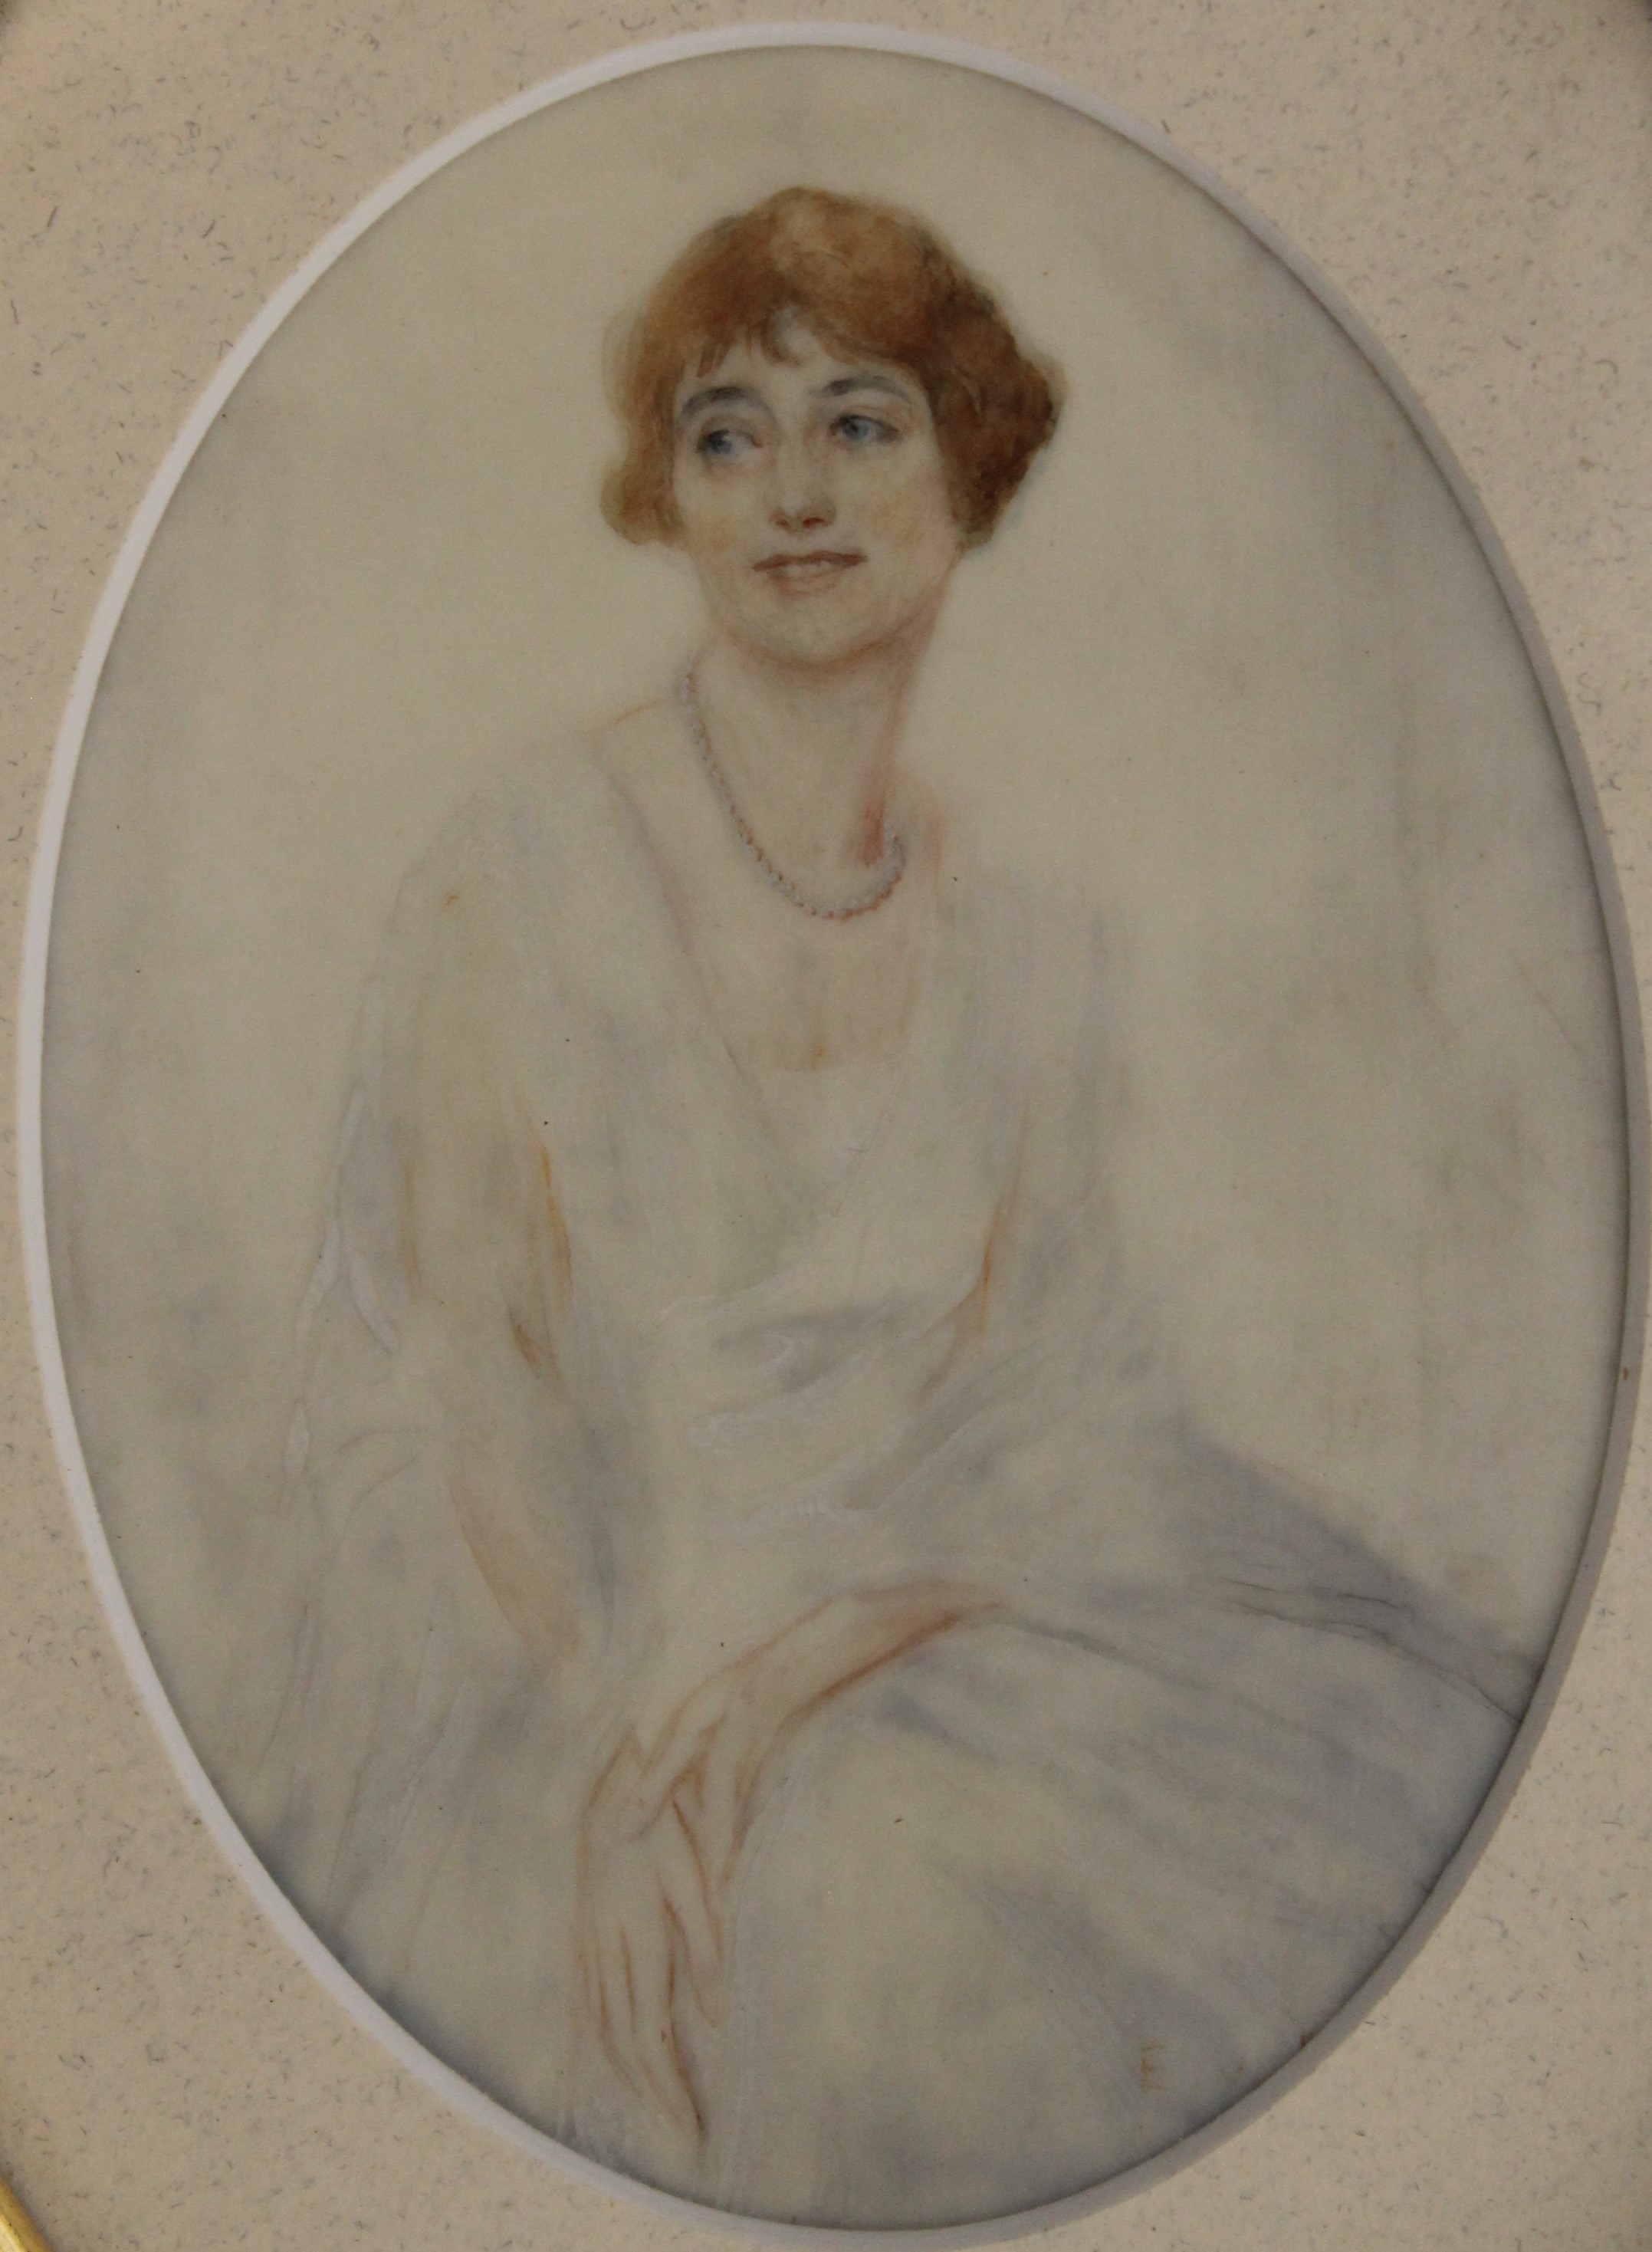 E VON HUTTENBRENNER, two early 20th century Portraits of a Lady, watercolours, one on paper, - Image 6 of 7